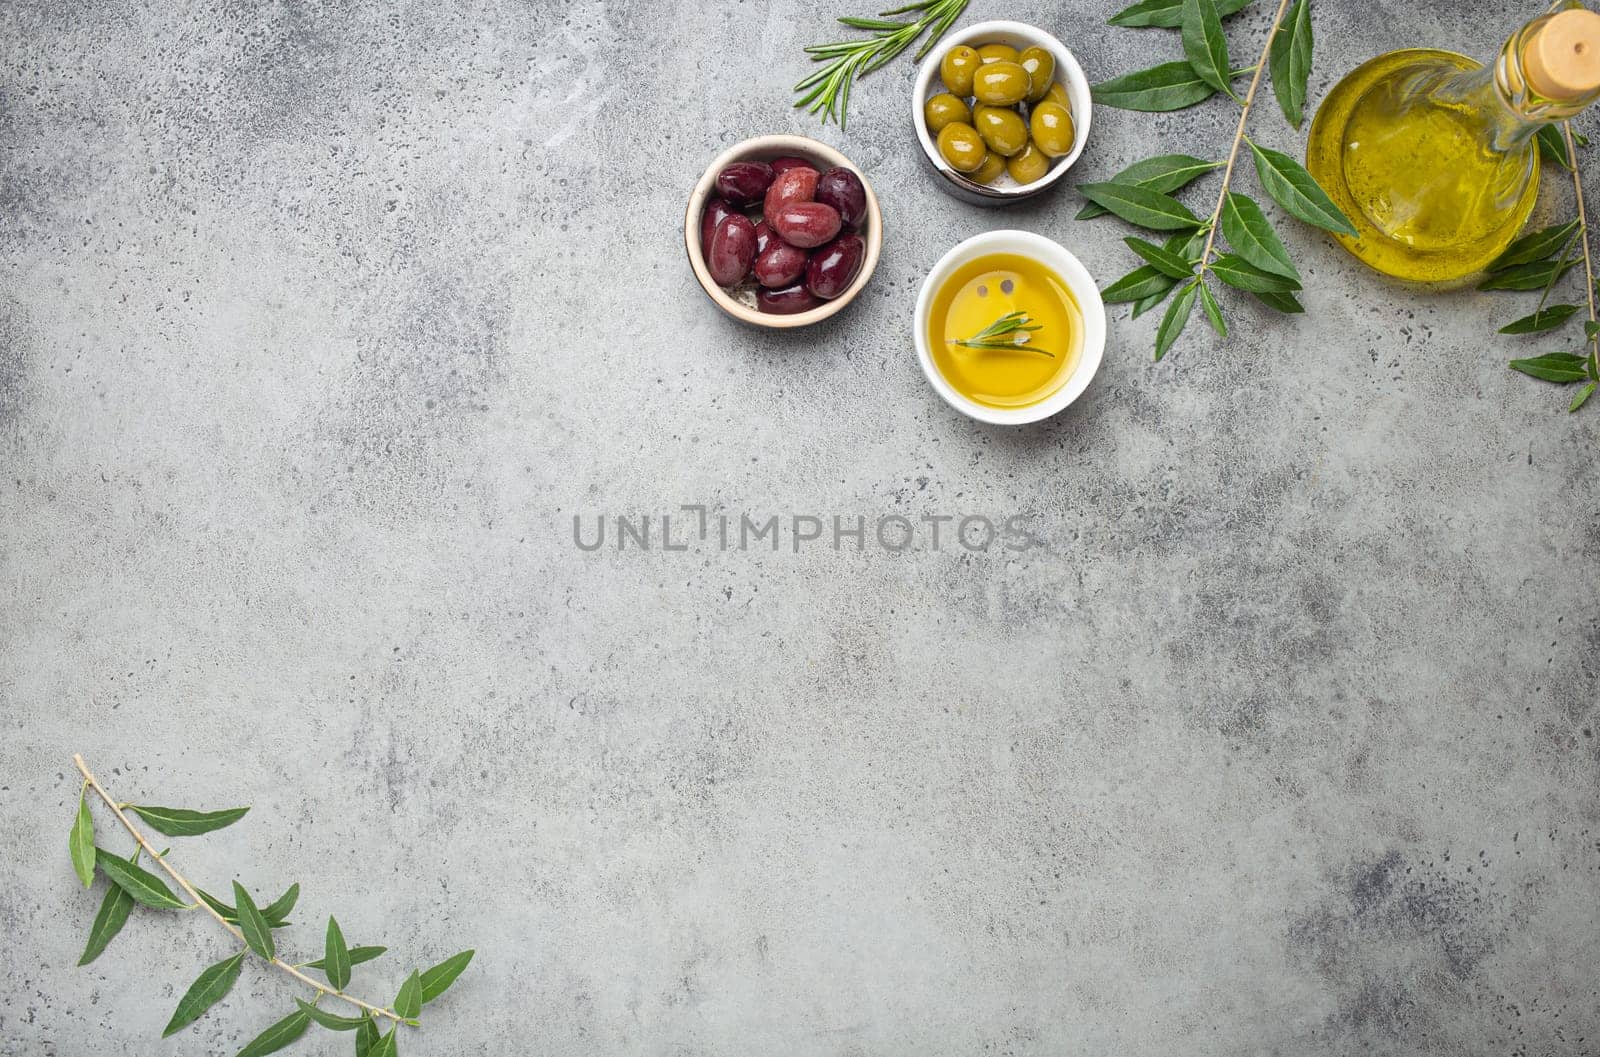 Composition with green and brown olives, extra virgin olive oil in glass bottle, olive tree branches on gray concrete stone rustic background overhead, copy space border